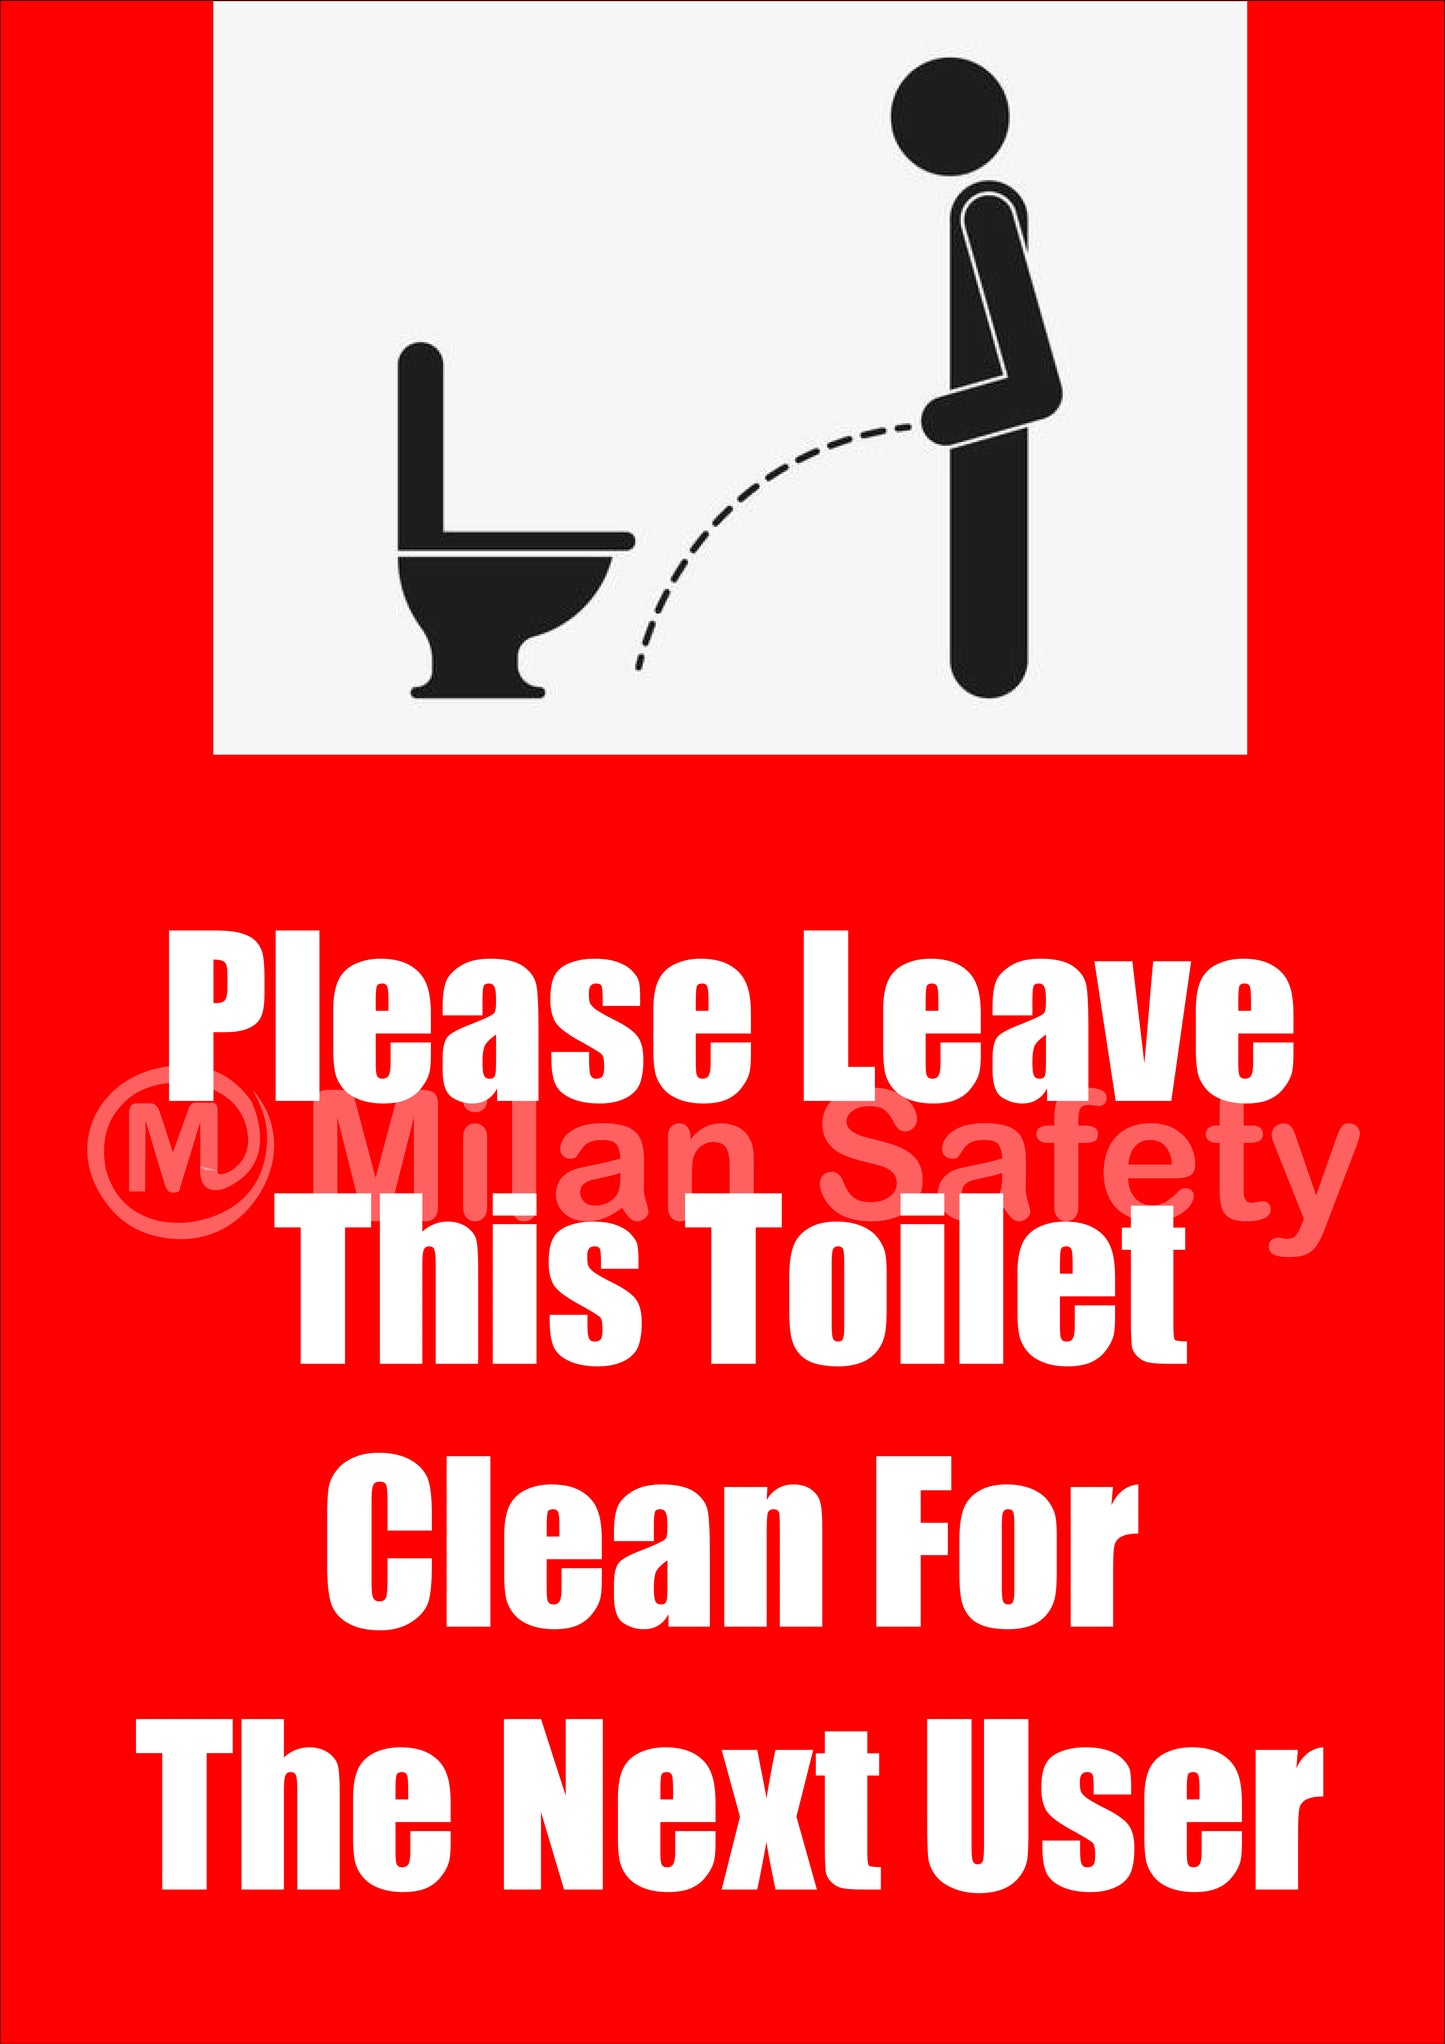 keep the toilet clean signage